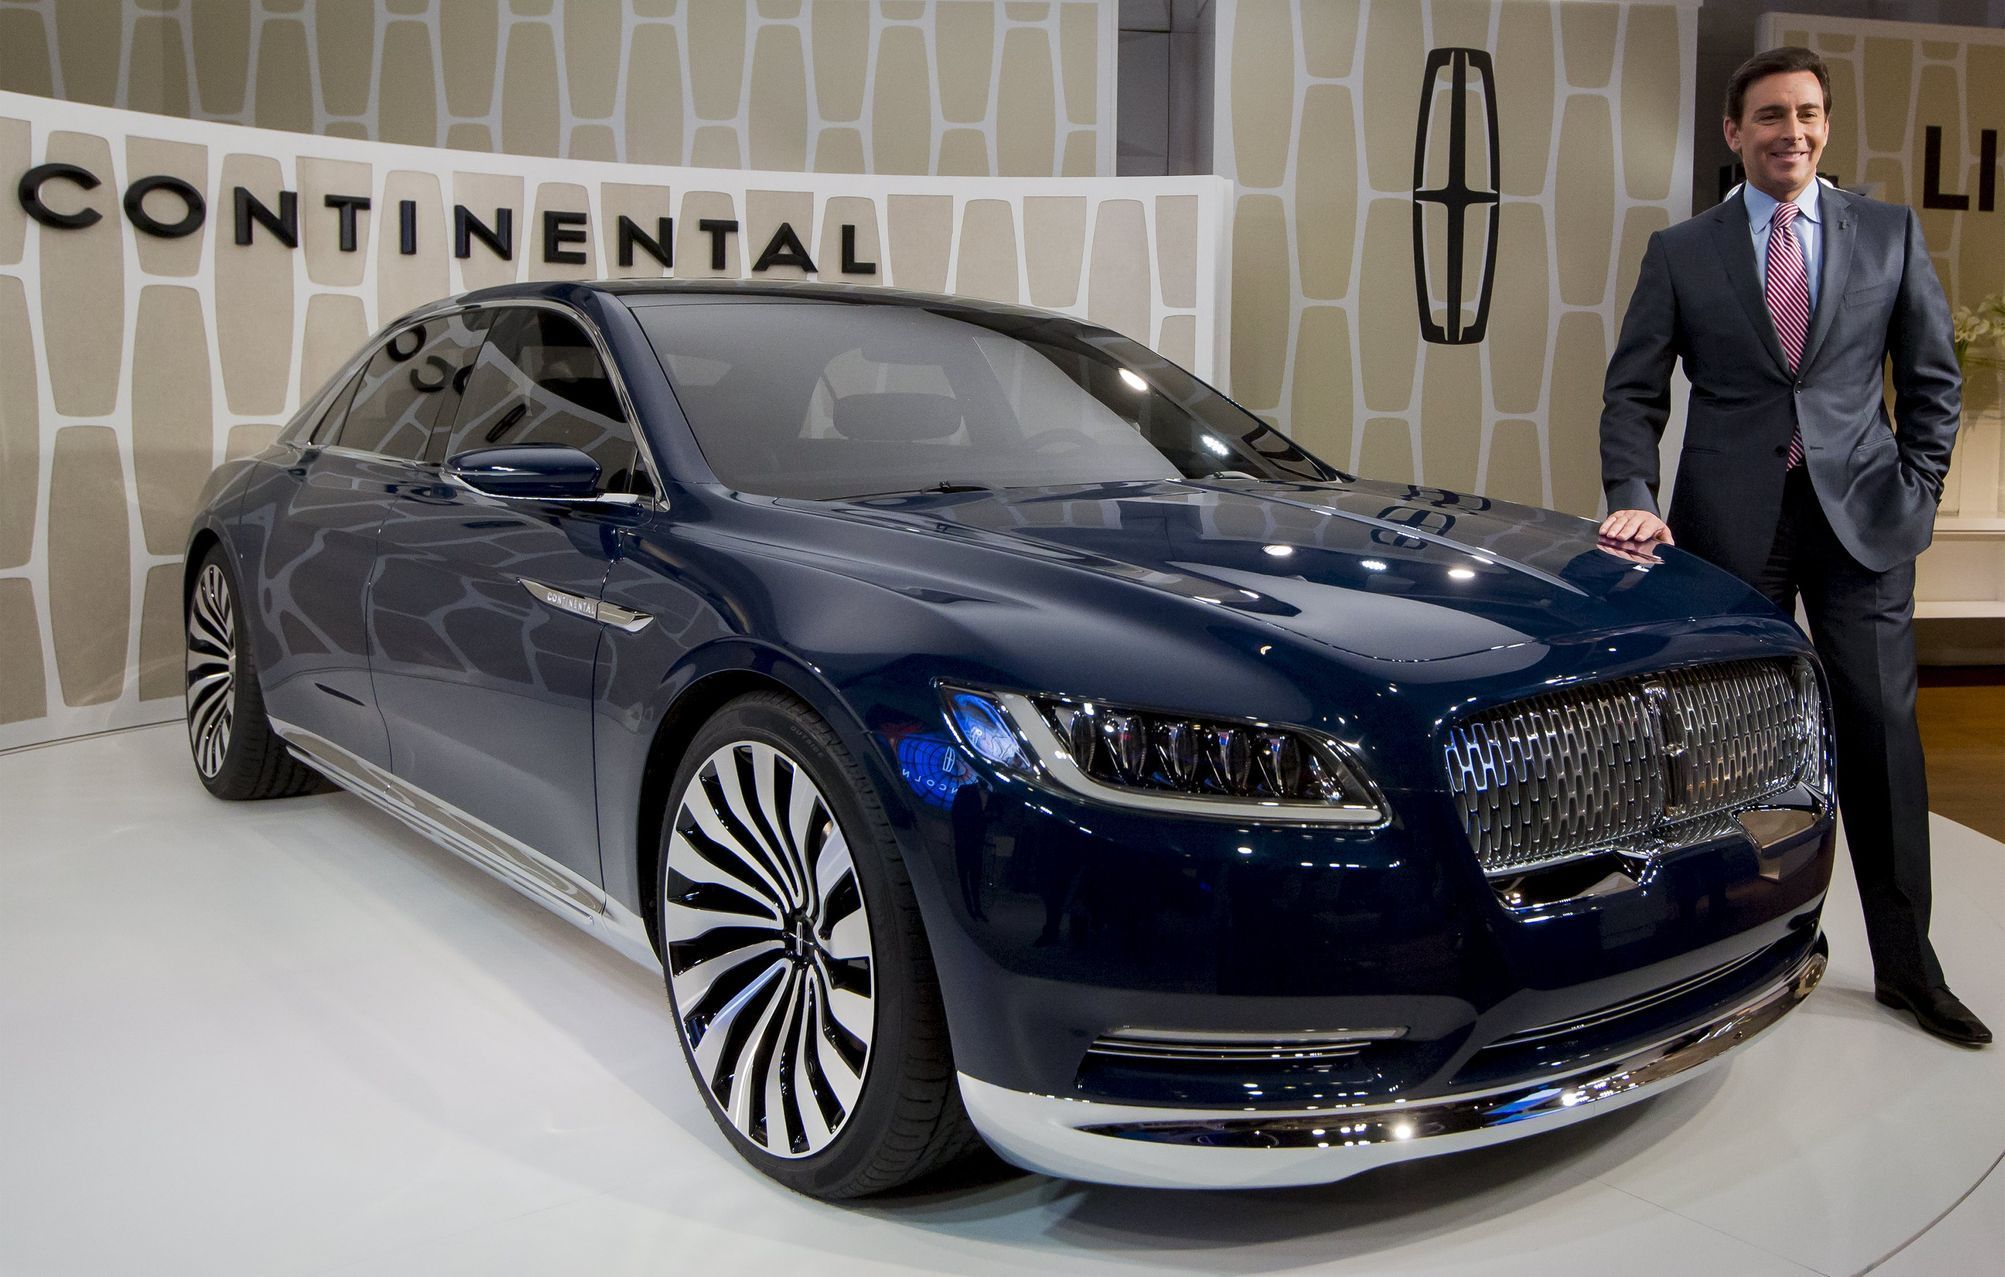 Ford Motor Co. CEO Fields poses with the Lincoln Continental concept car at an event ahead of the New York International Auto Show in New York